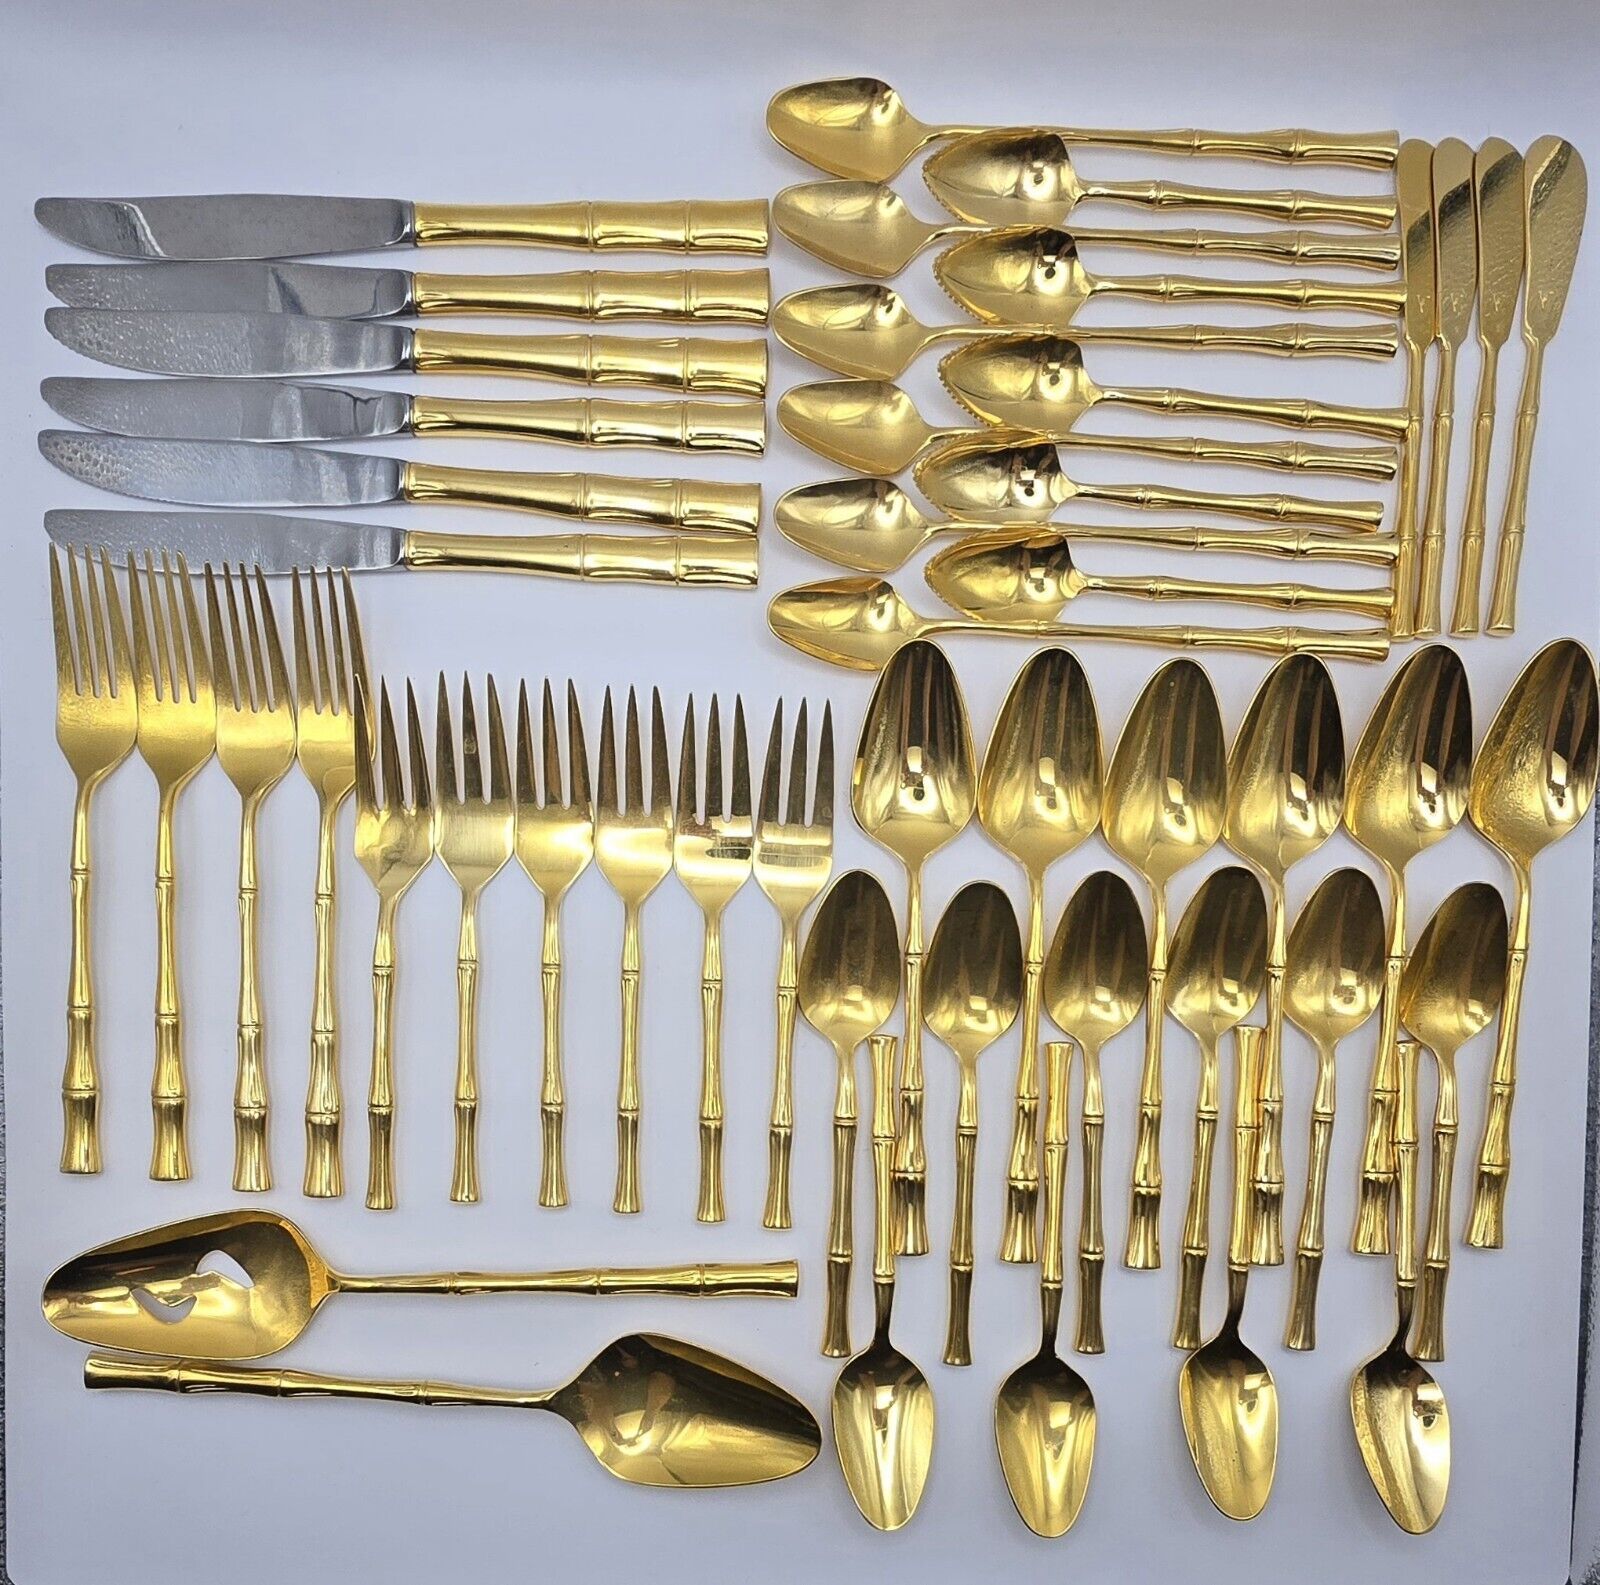 Viners of Sheffield Gold Plated Cane Faux Bamboo Flatware 49 Pieces Serving Set